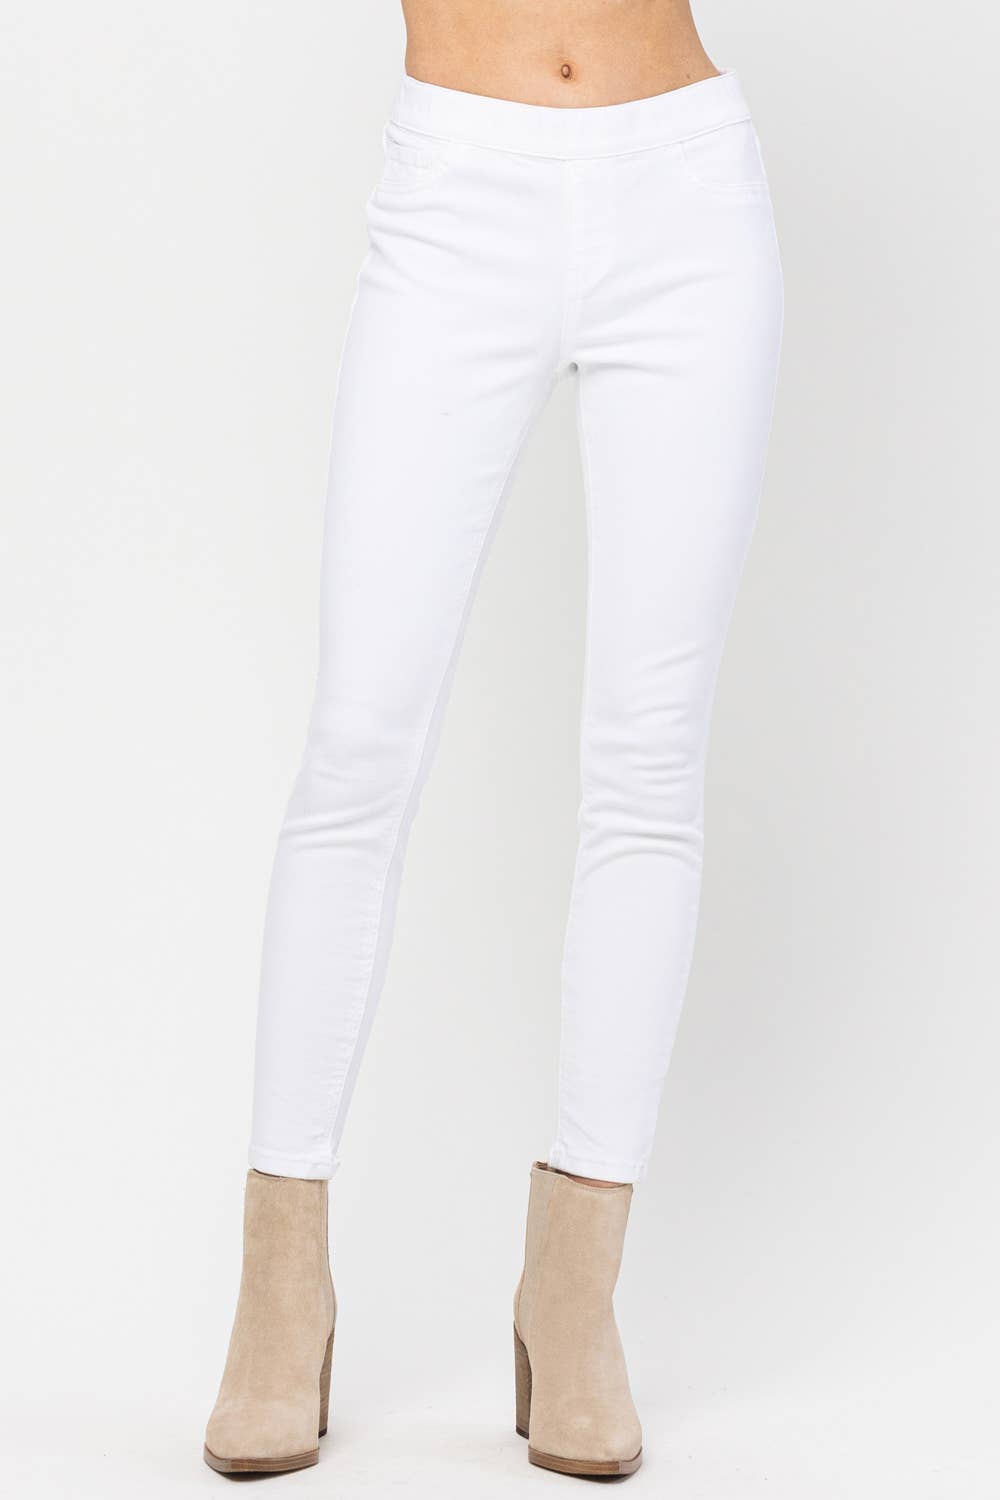 mid rise pull on skinny white jeans